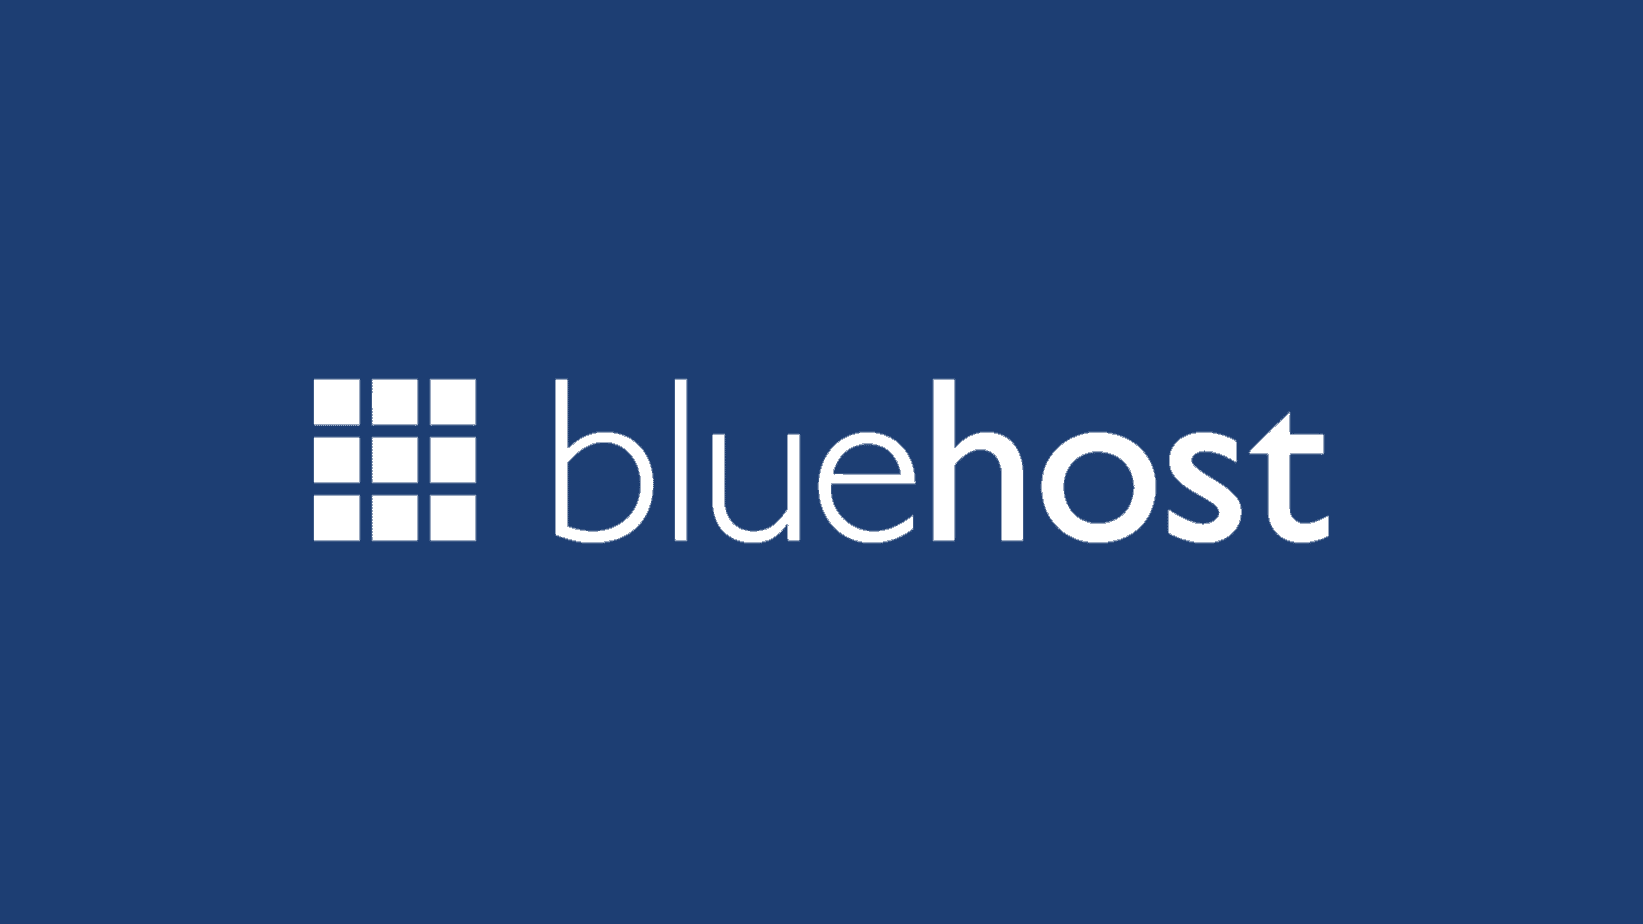 Bluehost Review: Is Bluehost A Good Web Host?